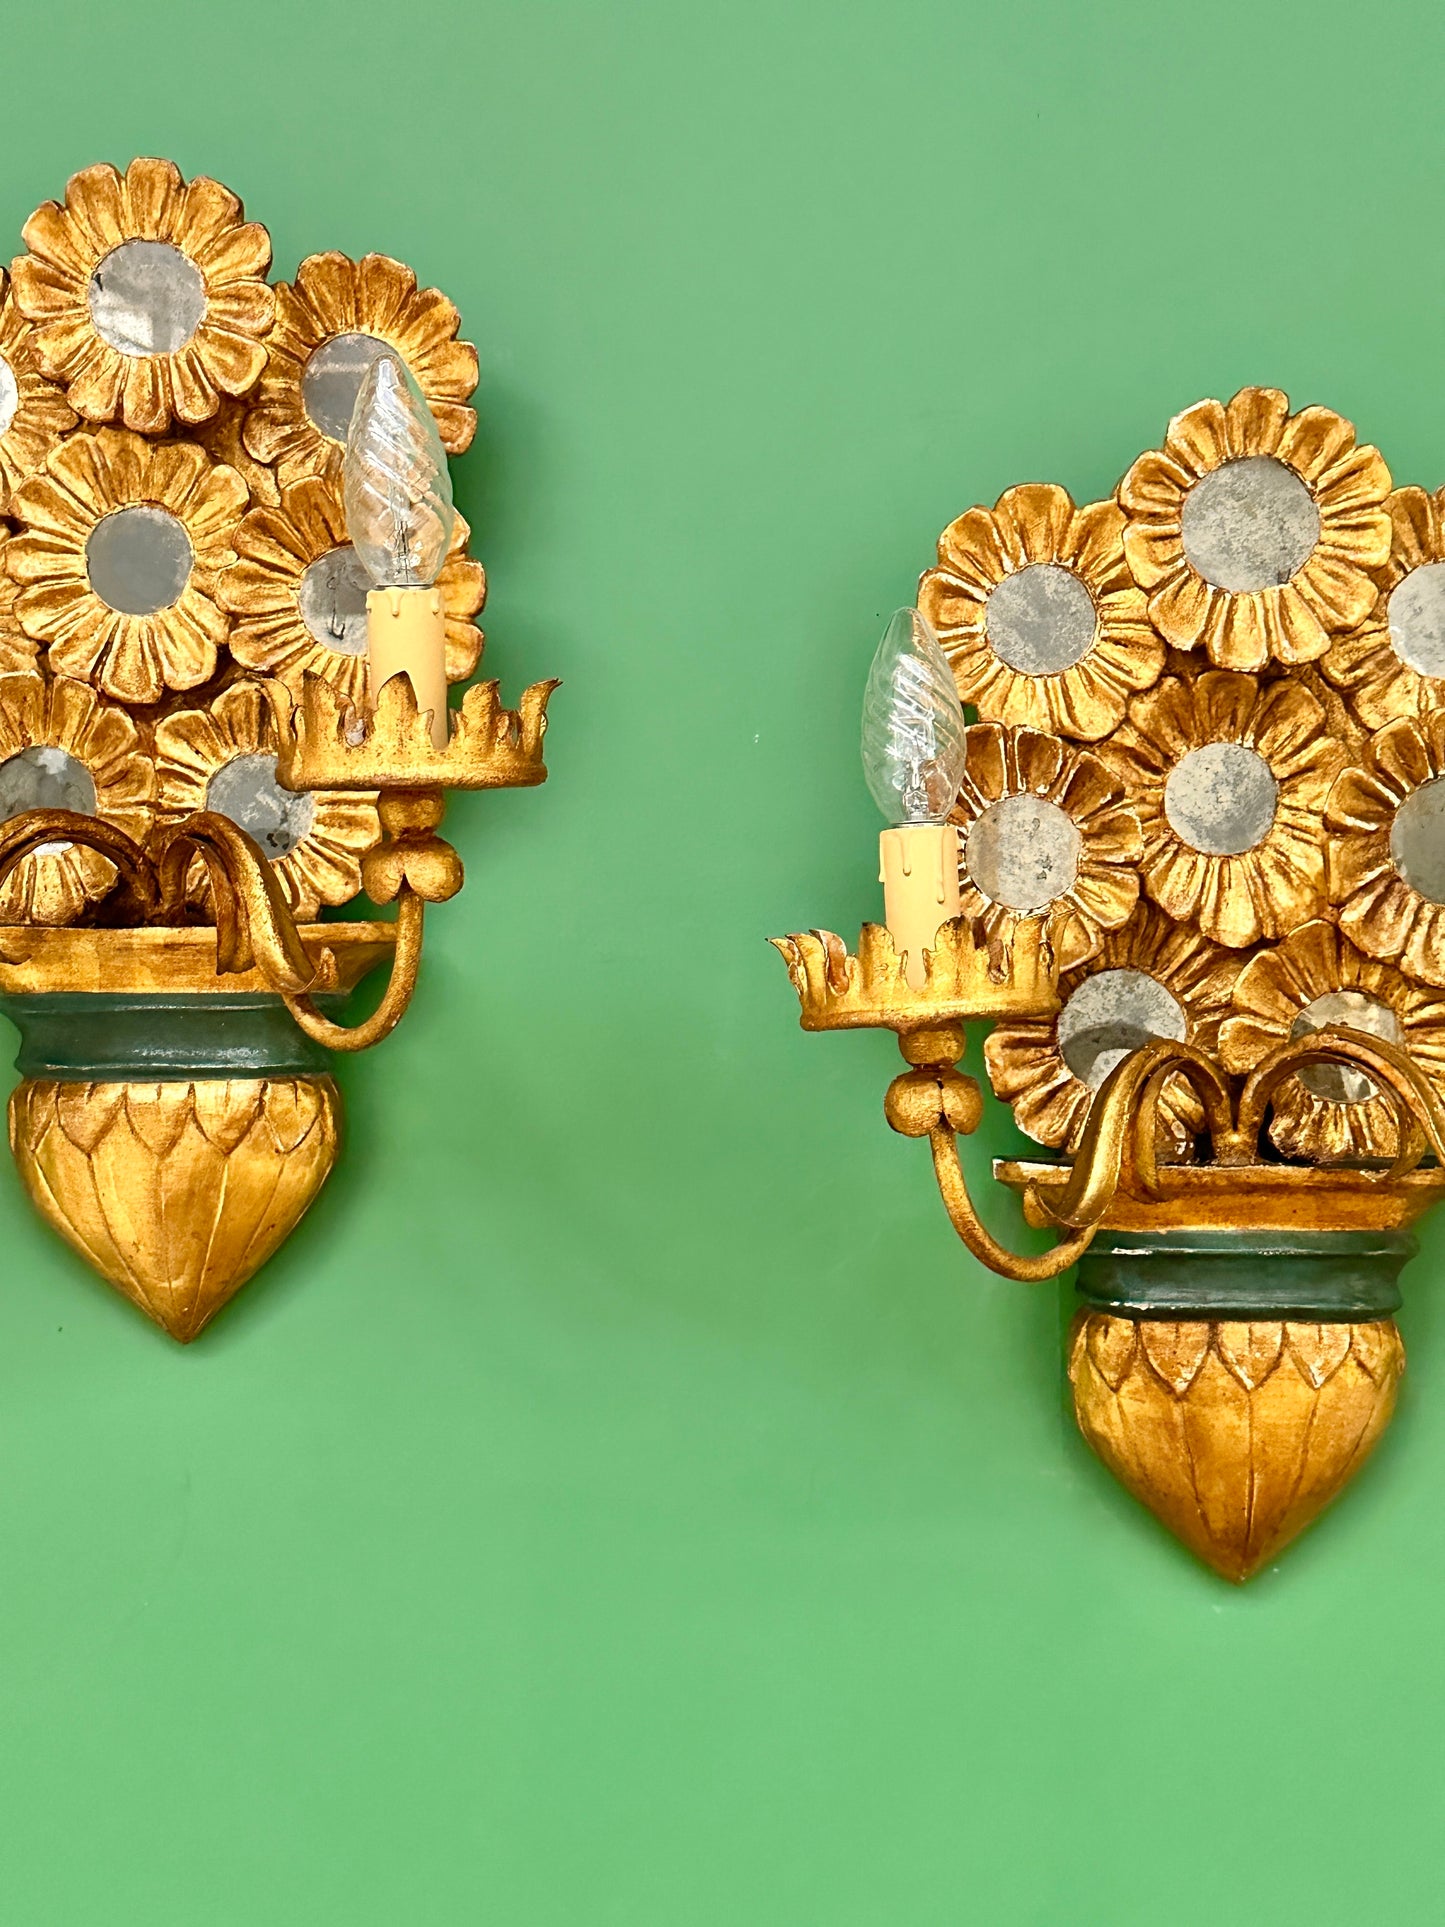 Pair Of Early C20th Italian Giltwood Wall Lights (1 of 2 pairs available)